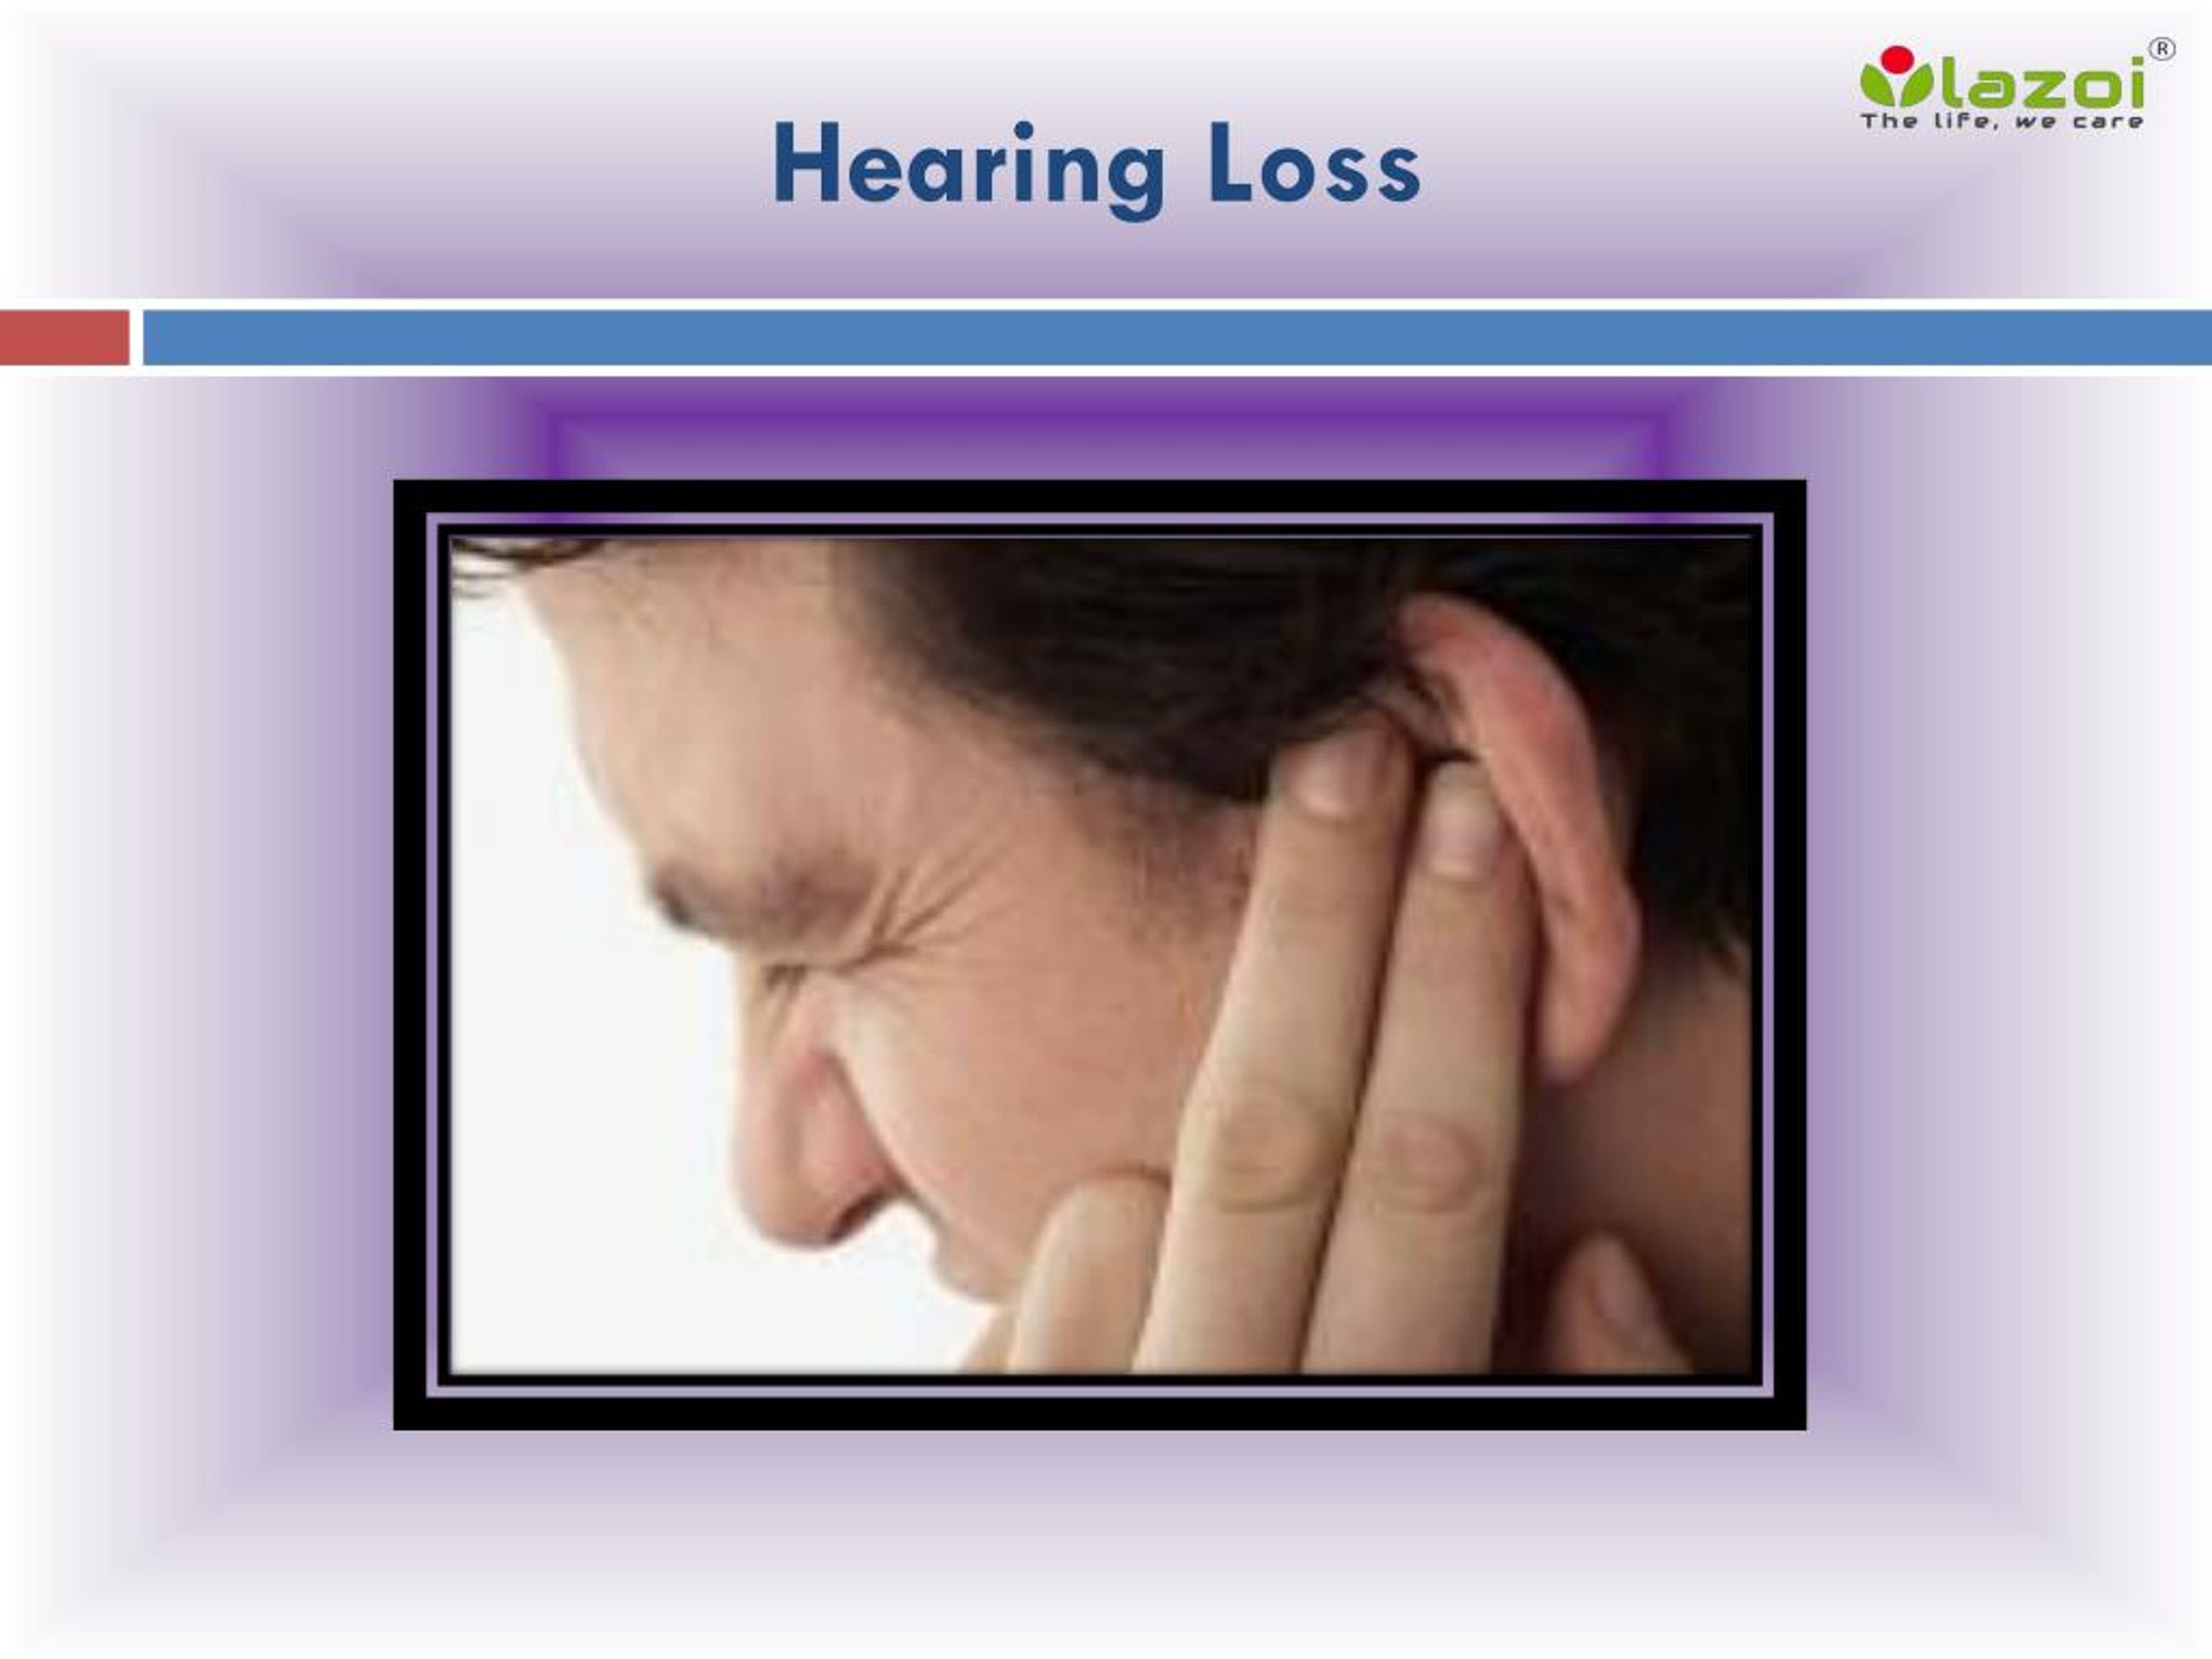 5 causes of hearing loss